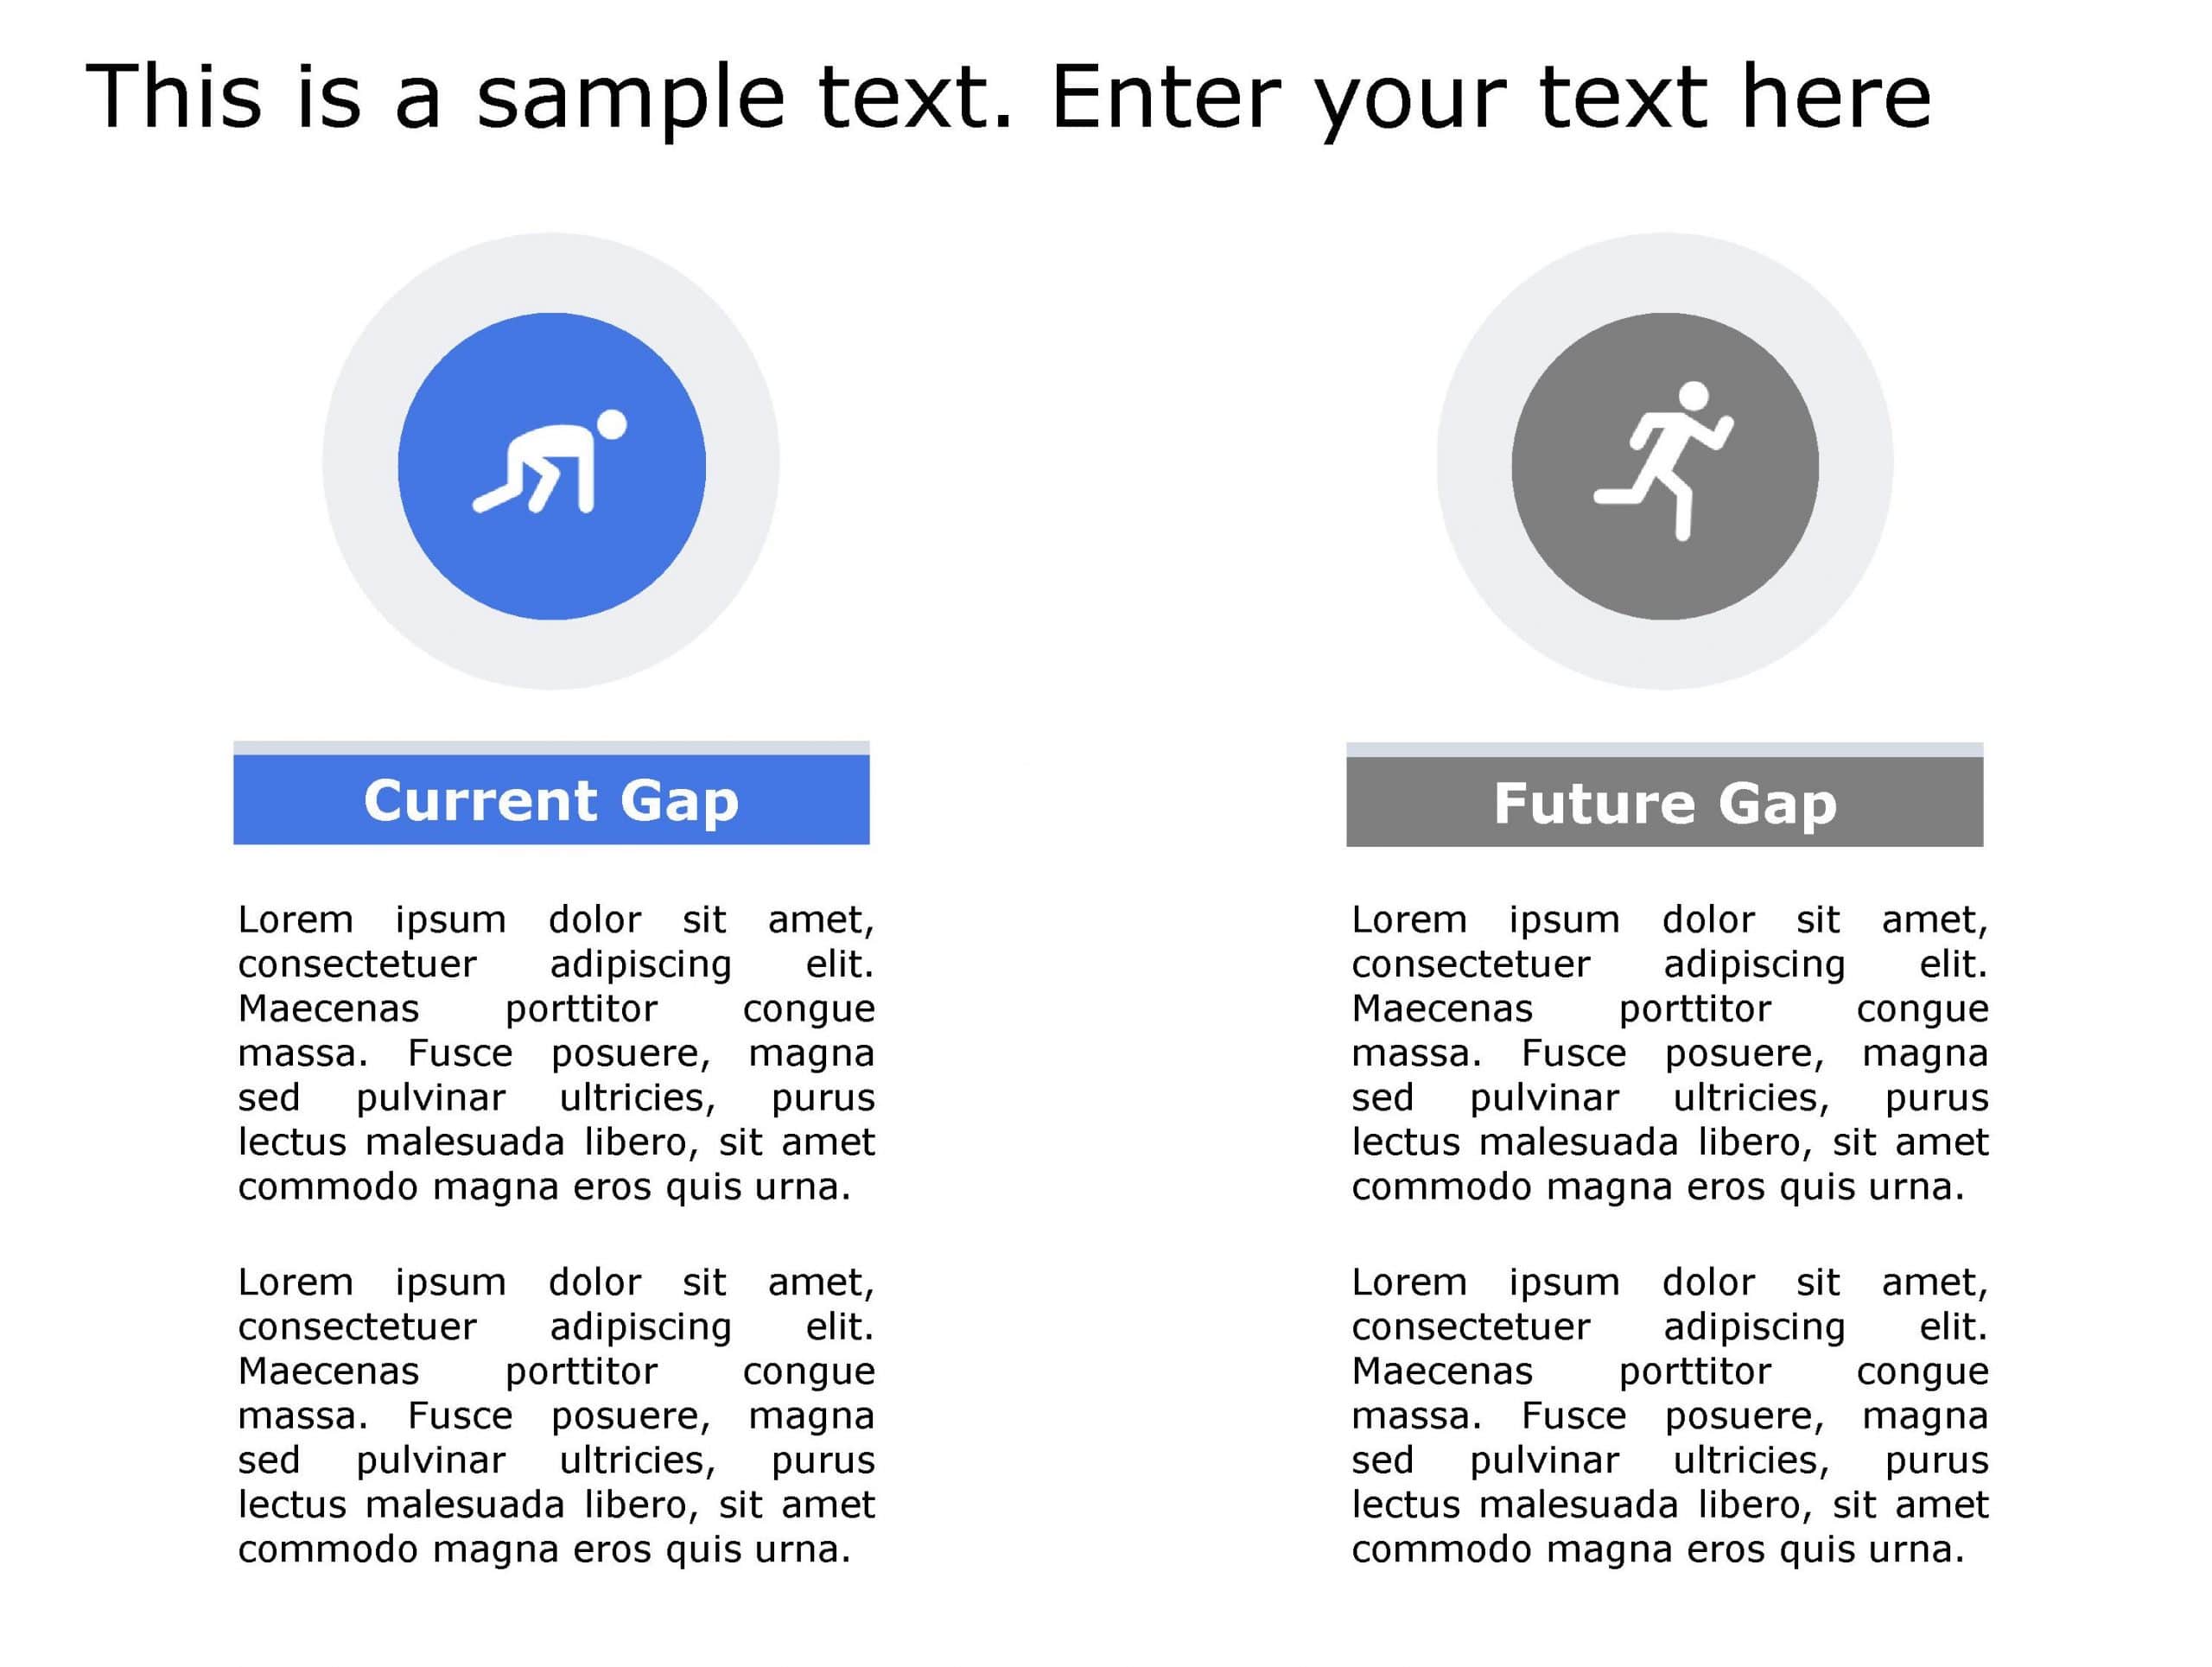 Current Future 133 PowerPoint Template & Google Slides Theme